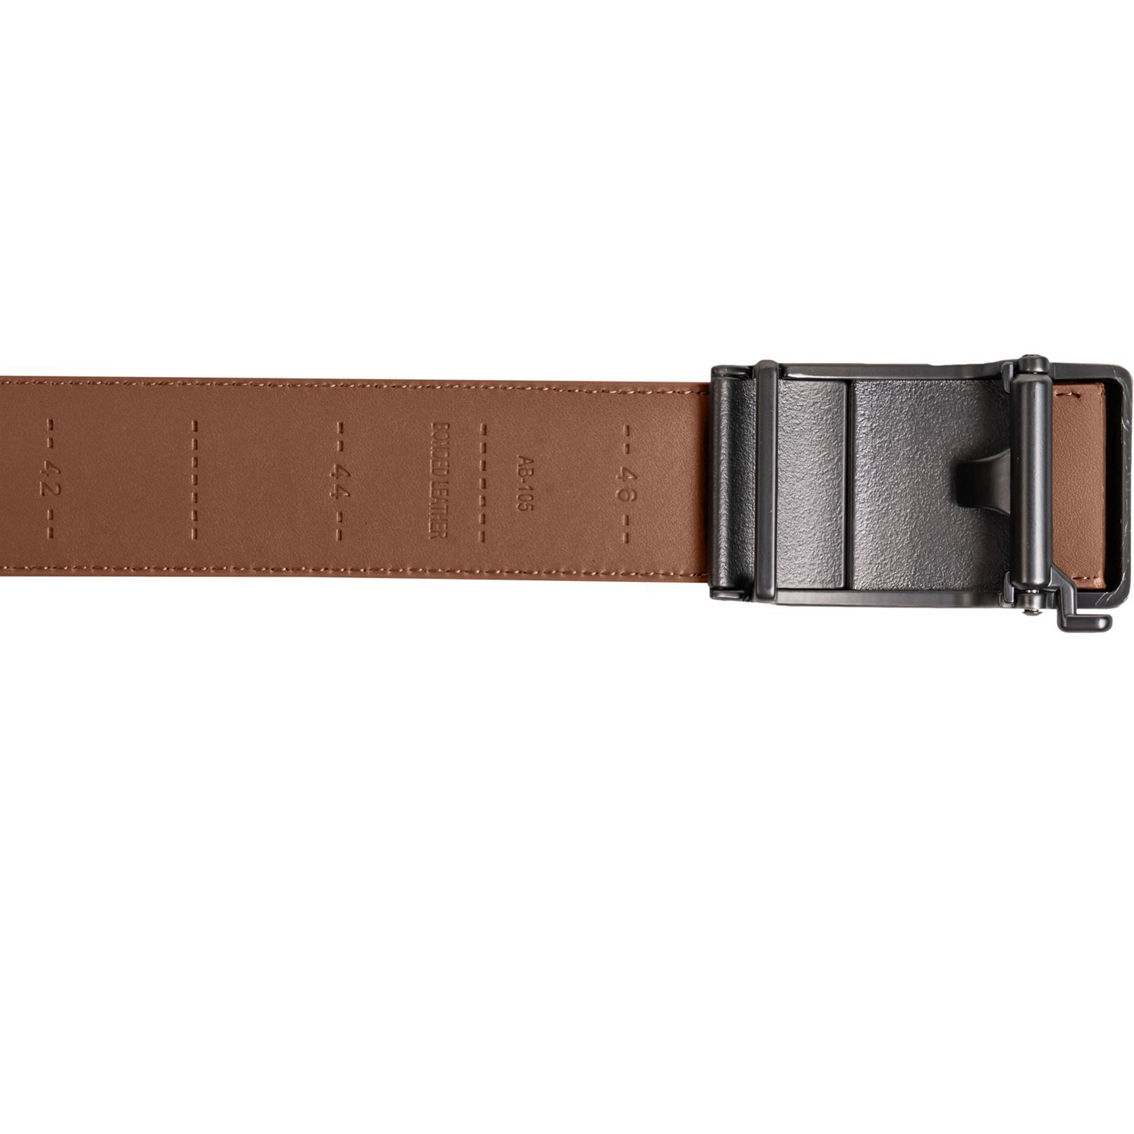 CHAMPS Men's Leather Automatic and Adjustable Belt, Brown - Image 4 of 5